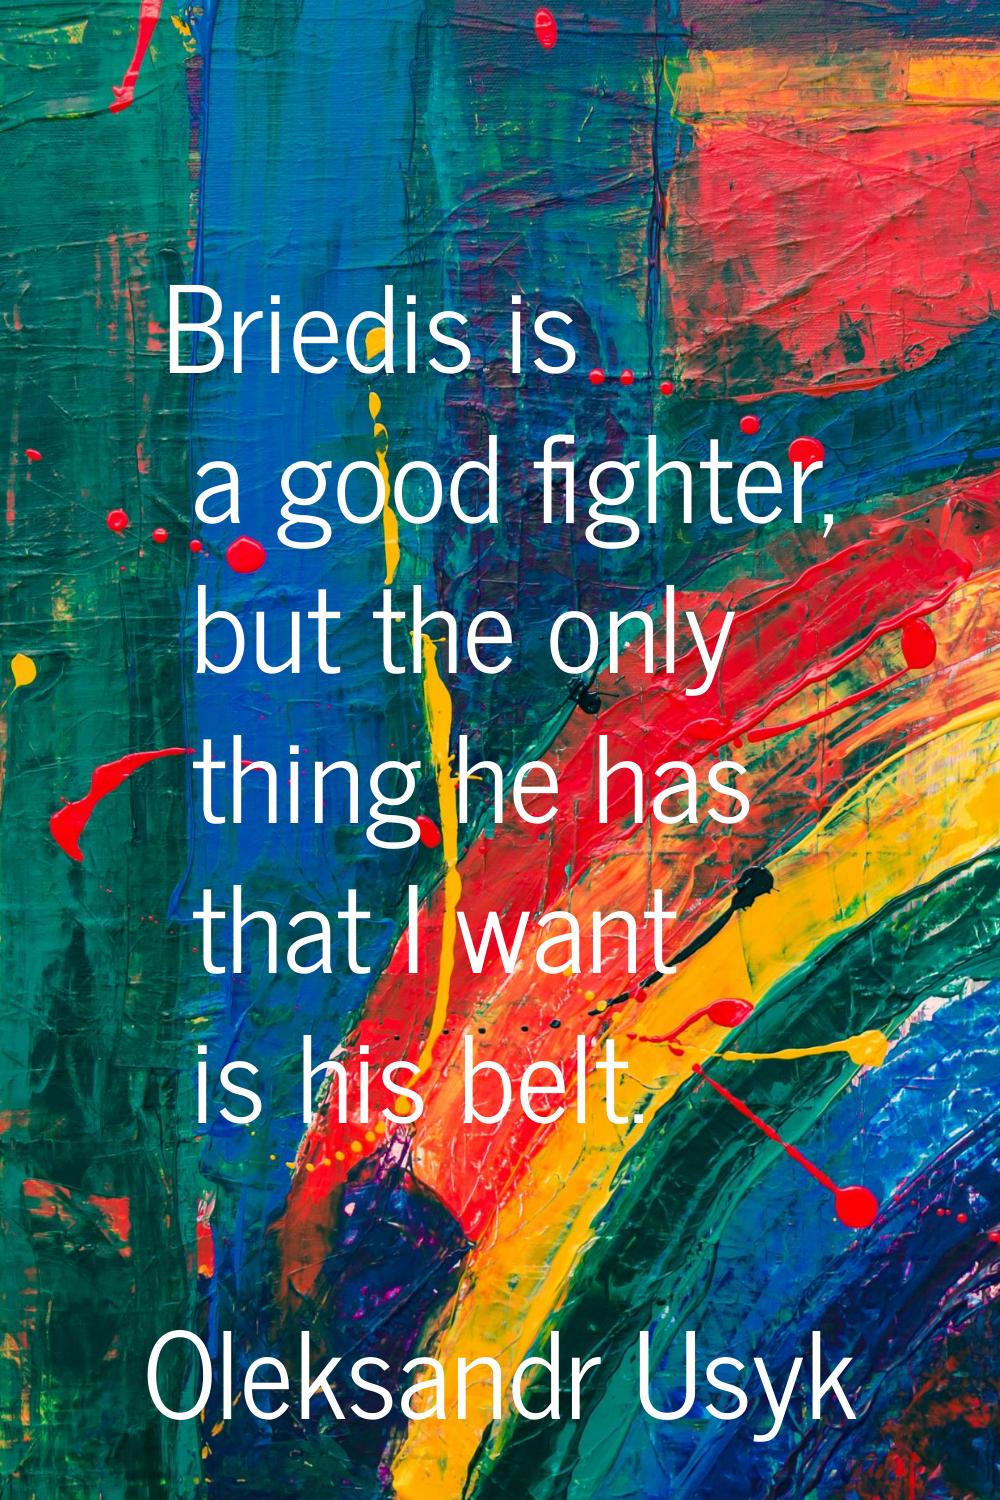 Briedis is a good fighter, but the only thing he has that I want is his belt.